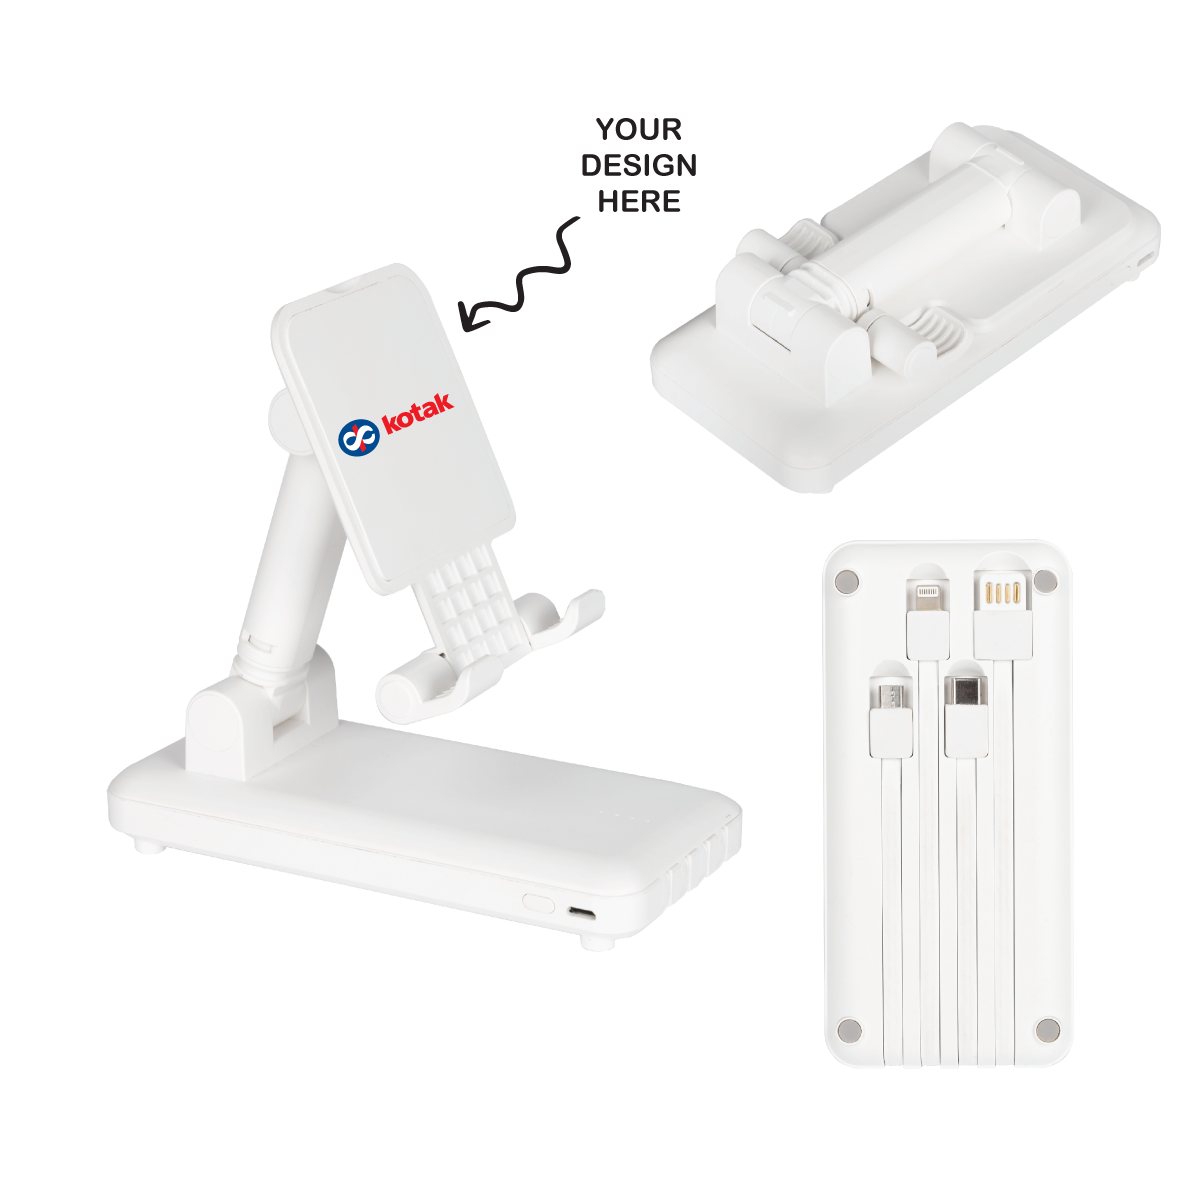 Personalized White 10000mAh Power Bank cum Mobile Stand - For Corporate Gifting, Event Gifting, Freebies, Promotions - EnCase P0206